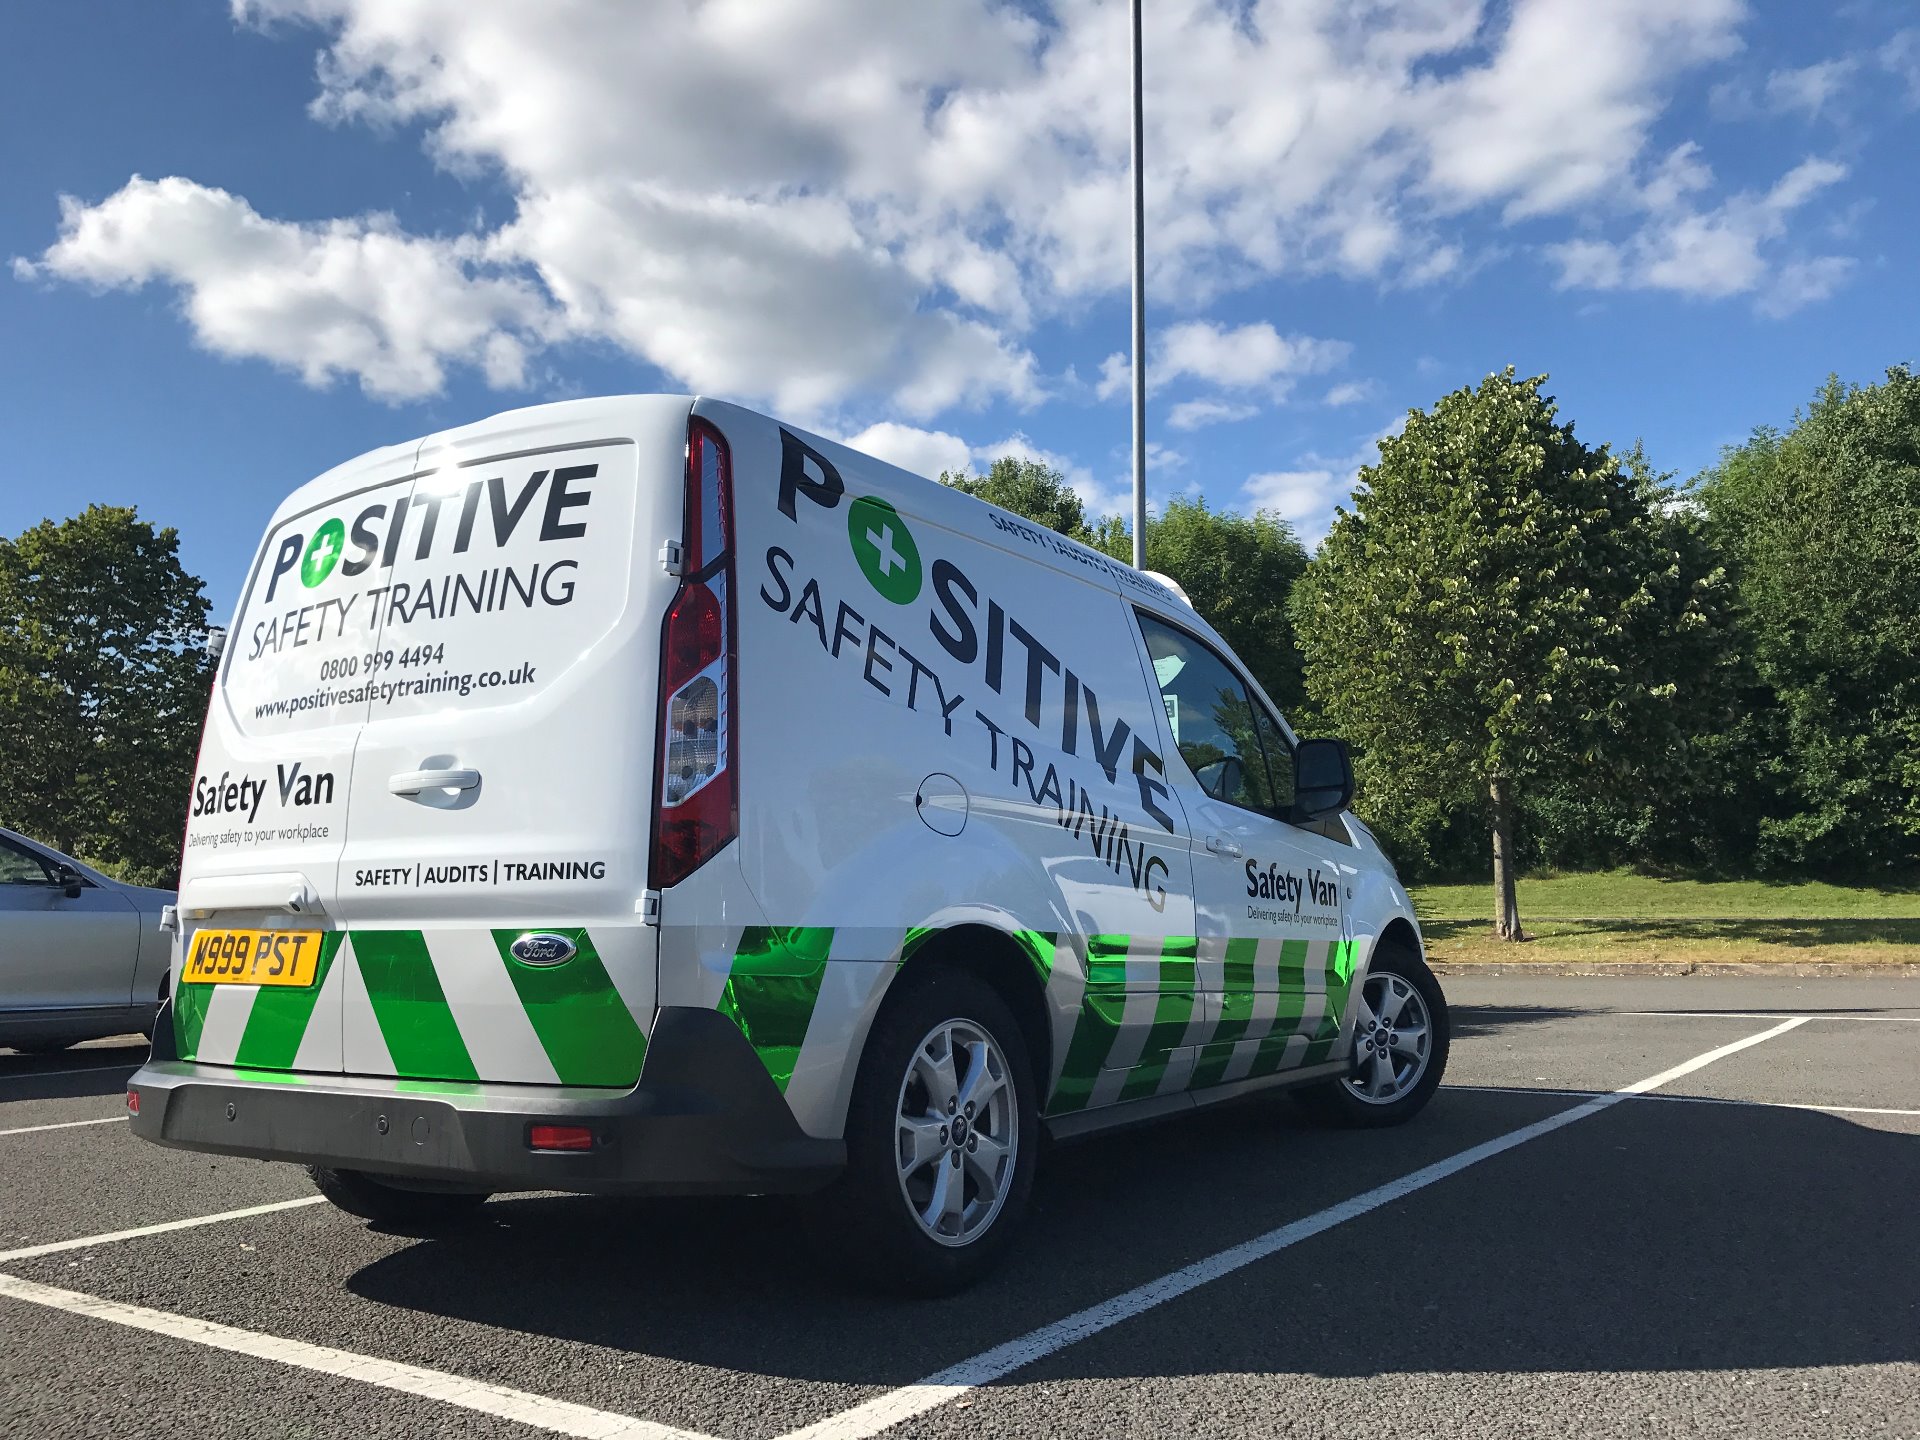 Safety Van - Delivering Safety to your workplace